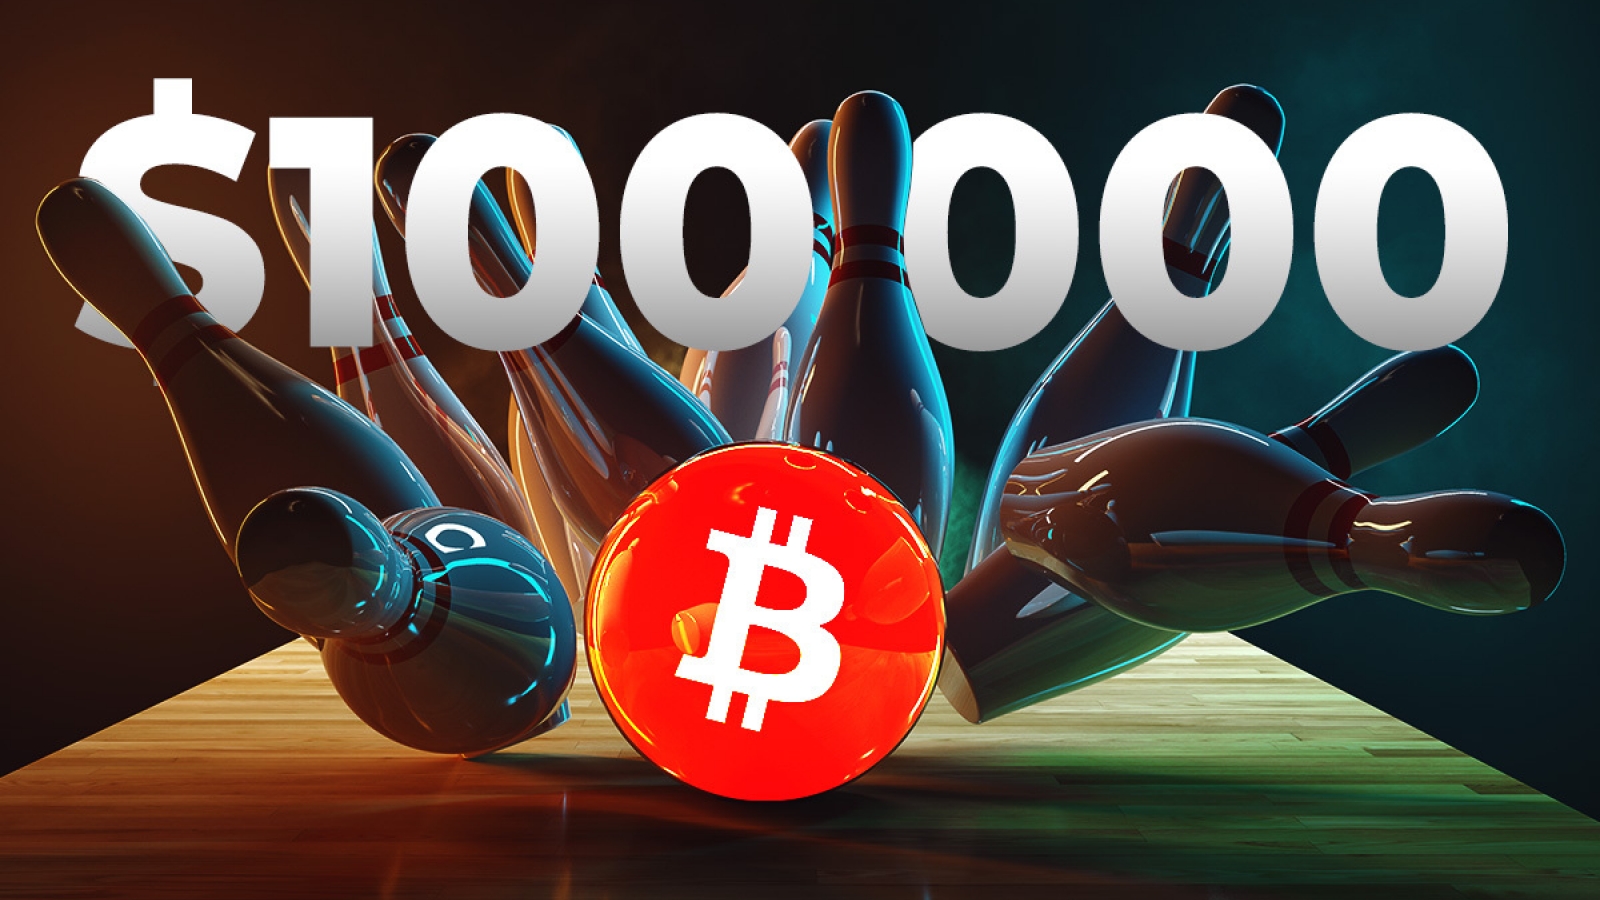 BTC Price May Hit $100,000 Before 2022, Crypto Influencer ...